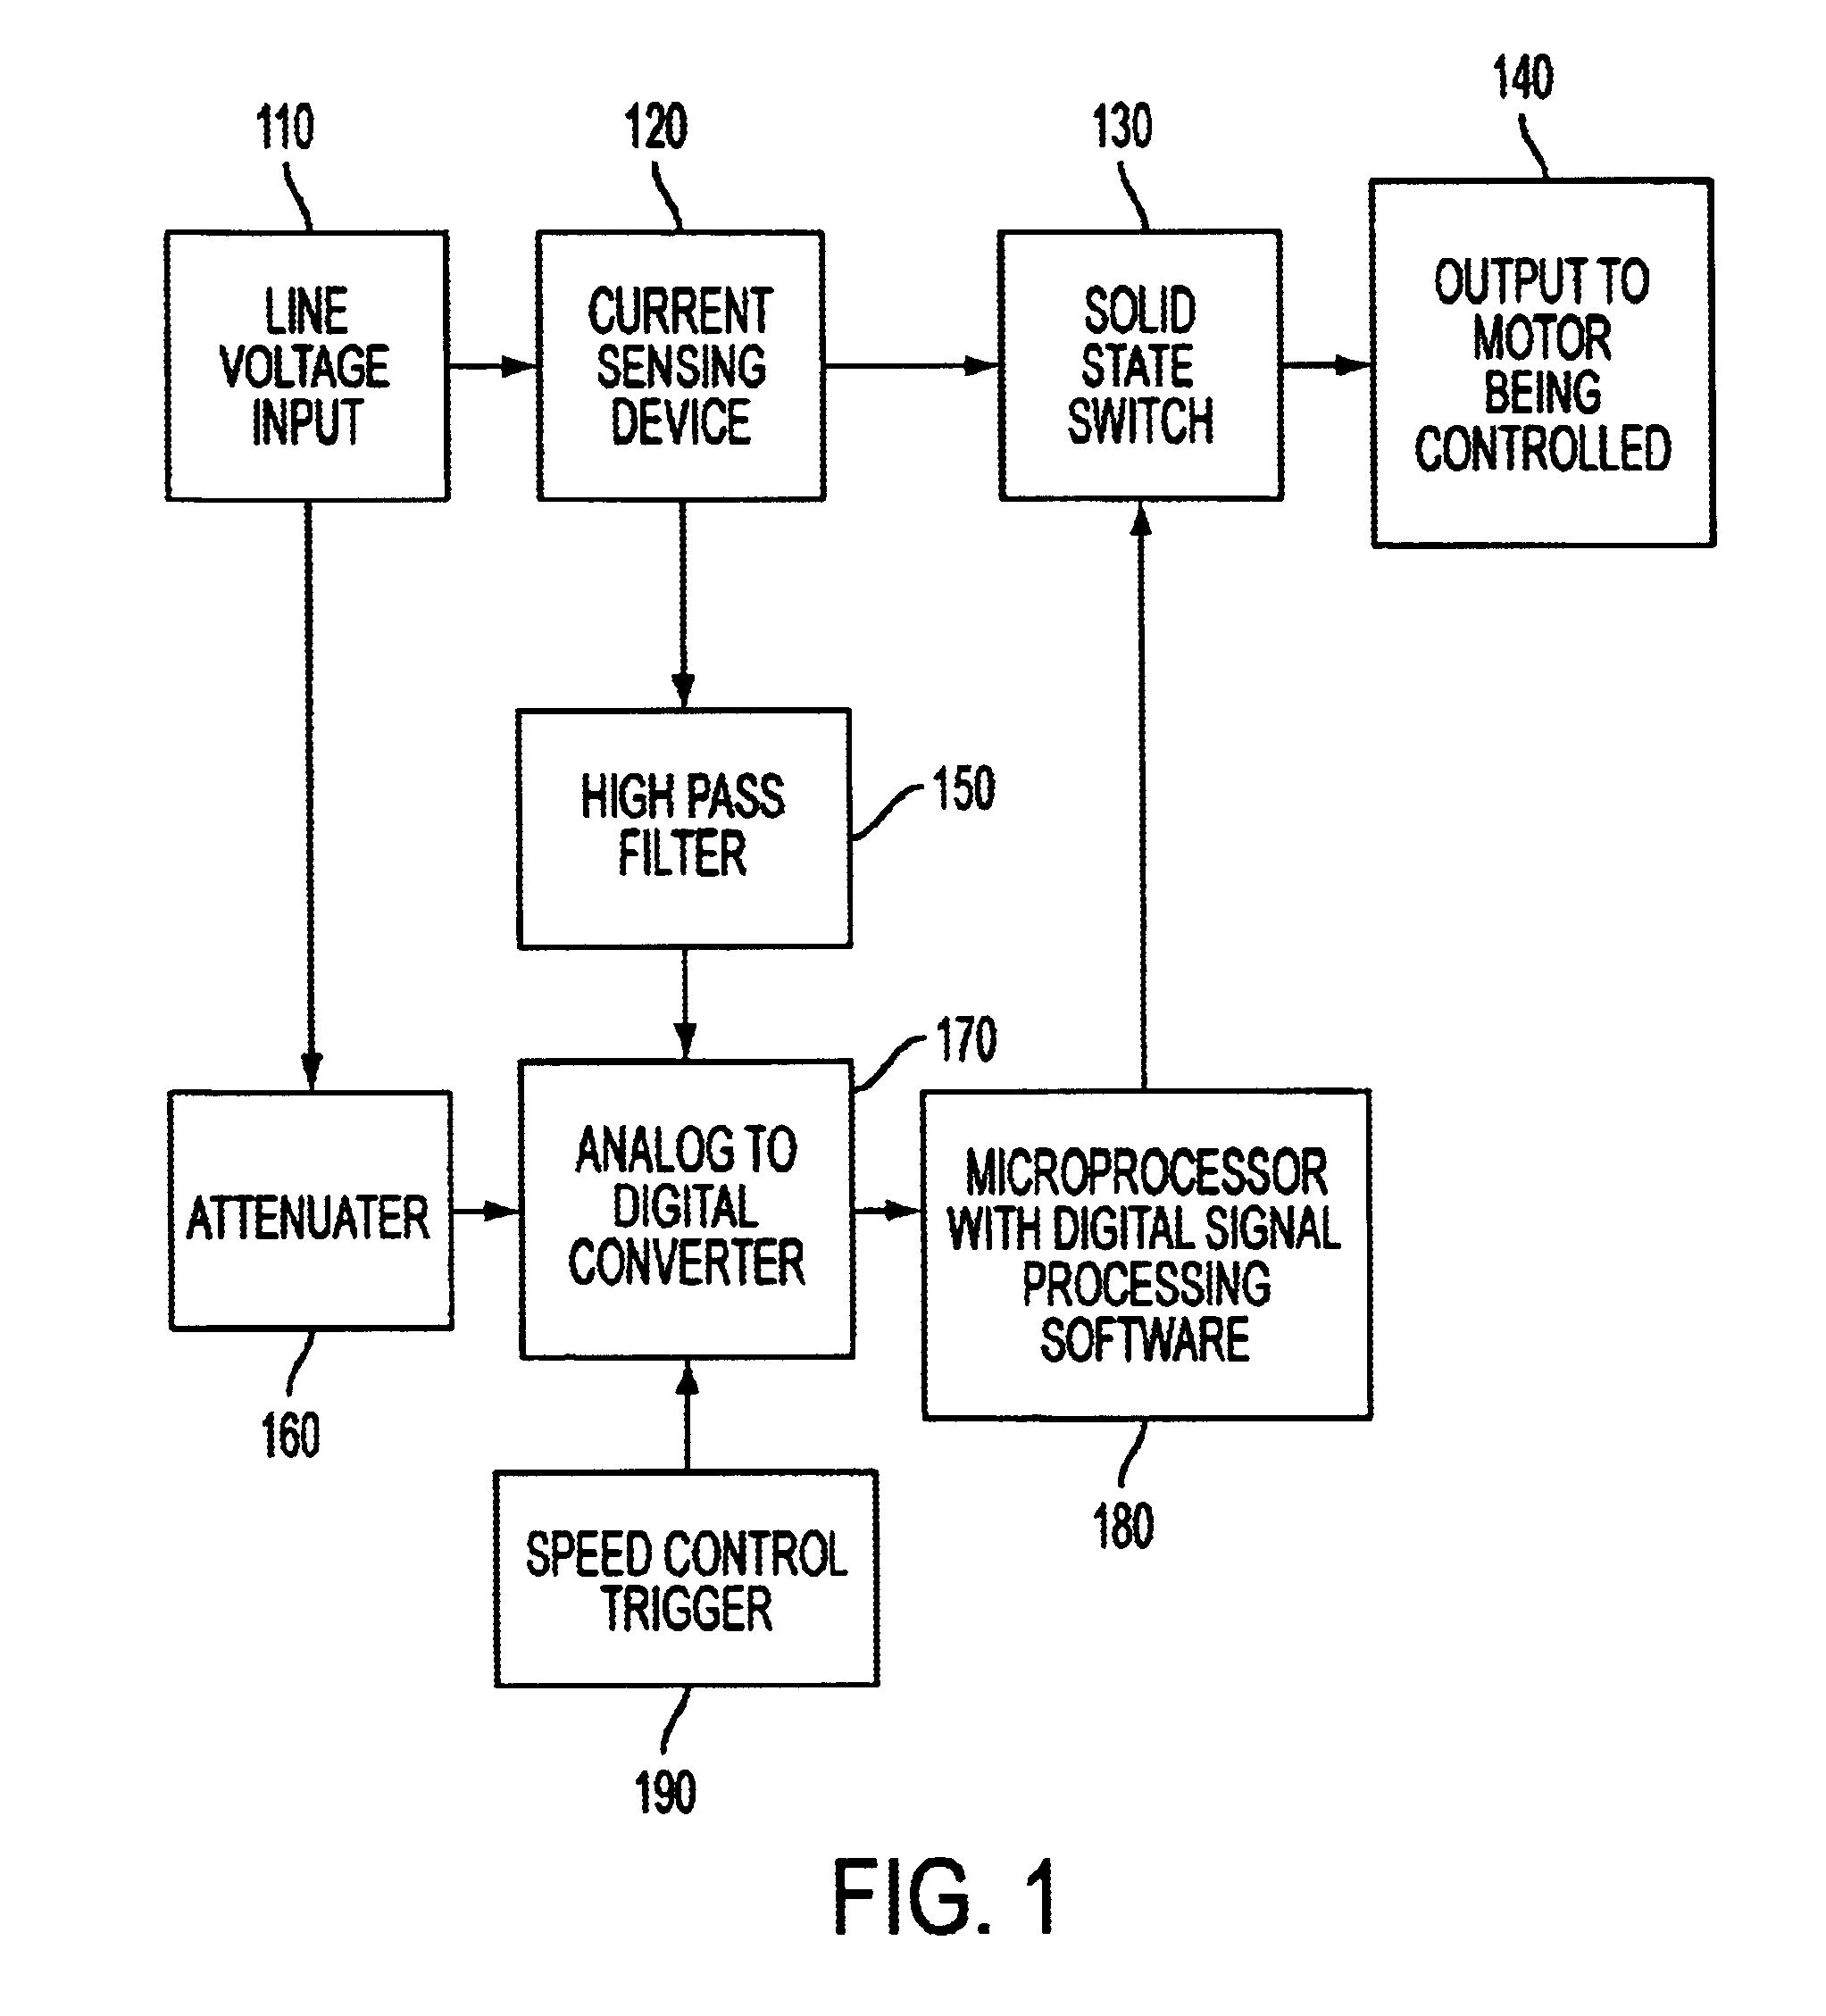 Methods and apparatus to improve the performance of universal electric motors